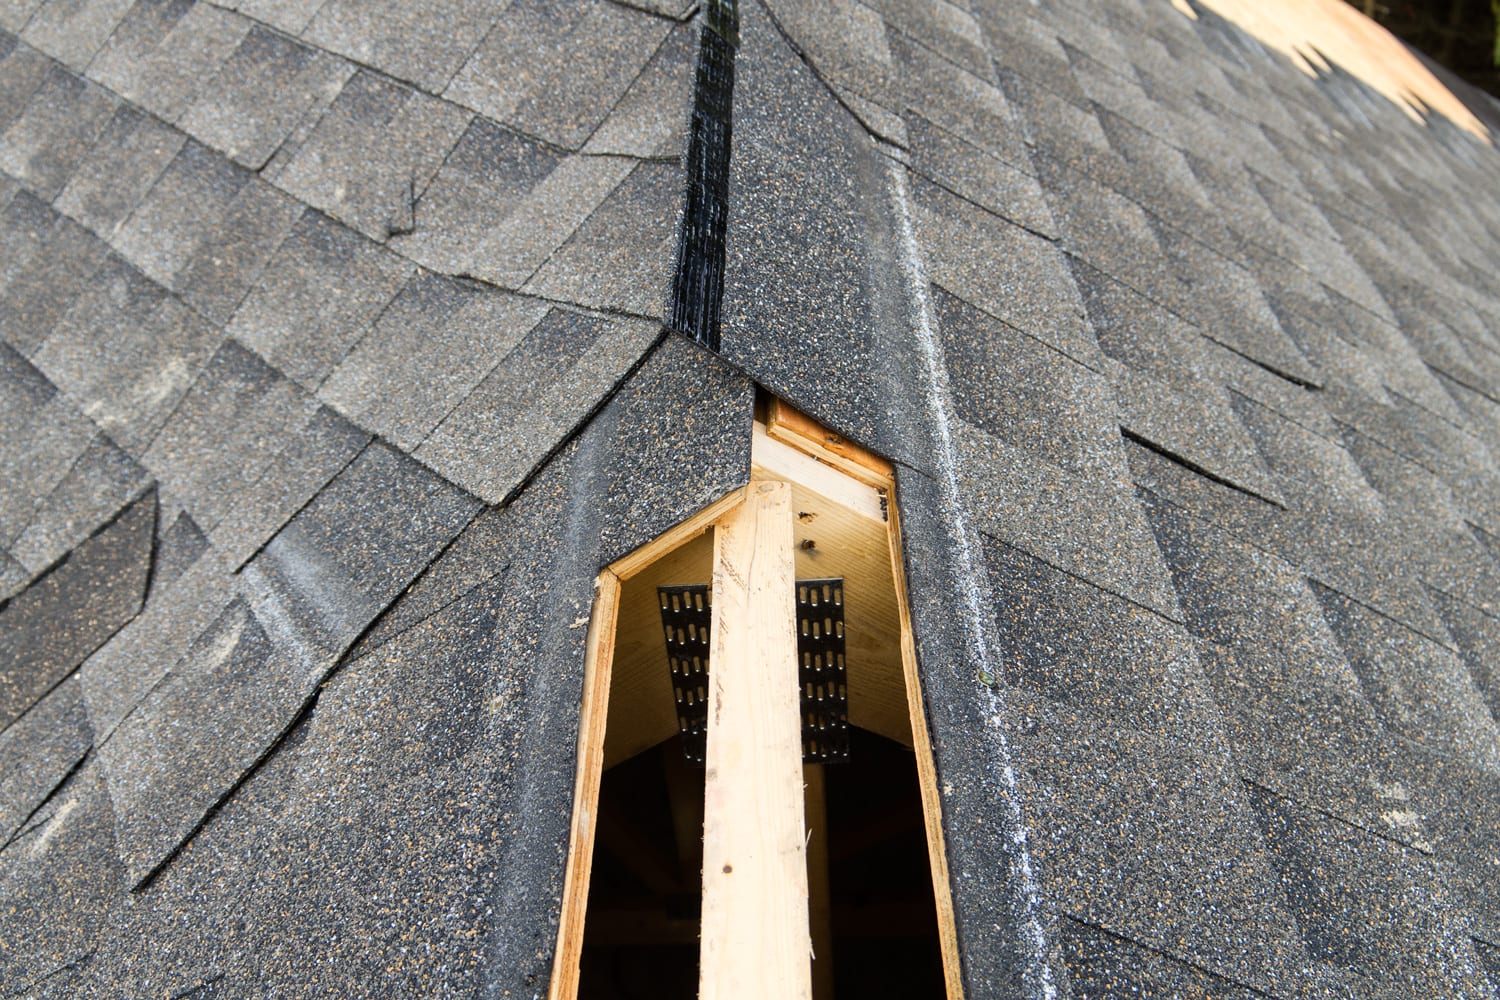 View of a partially shingled house roof, showing the cut-out for a ridge vent at the peak of the roof.Similar Images